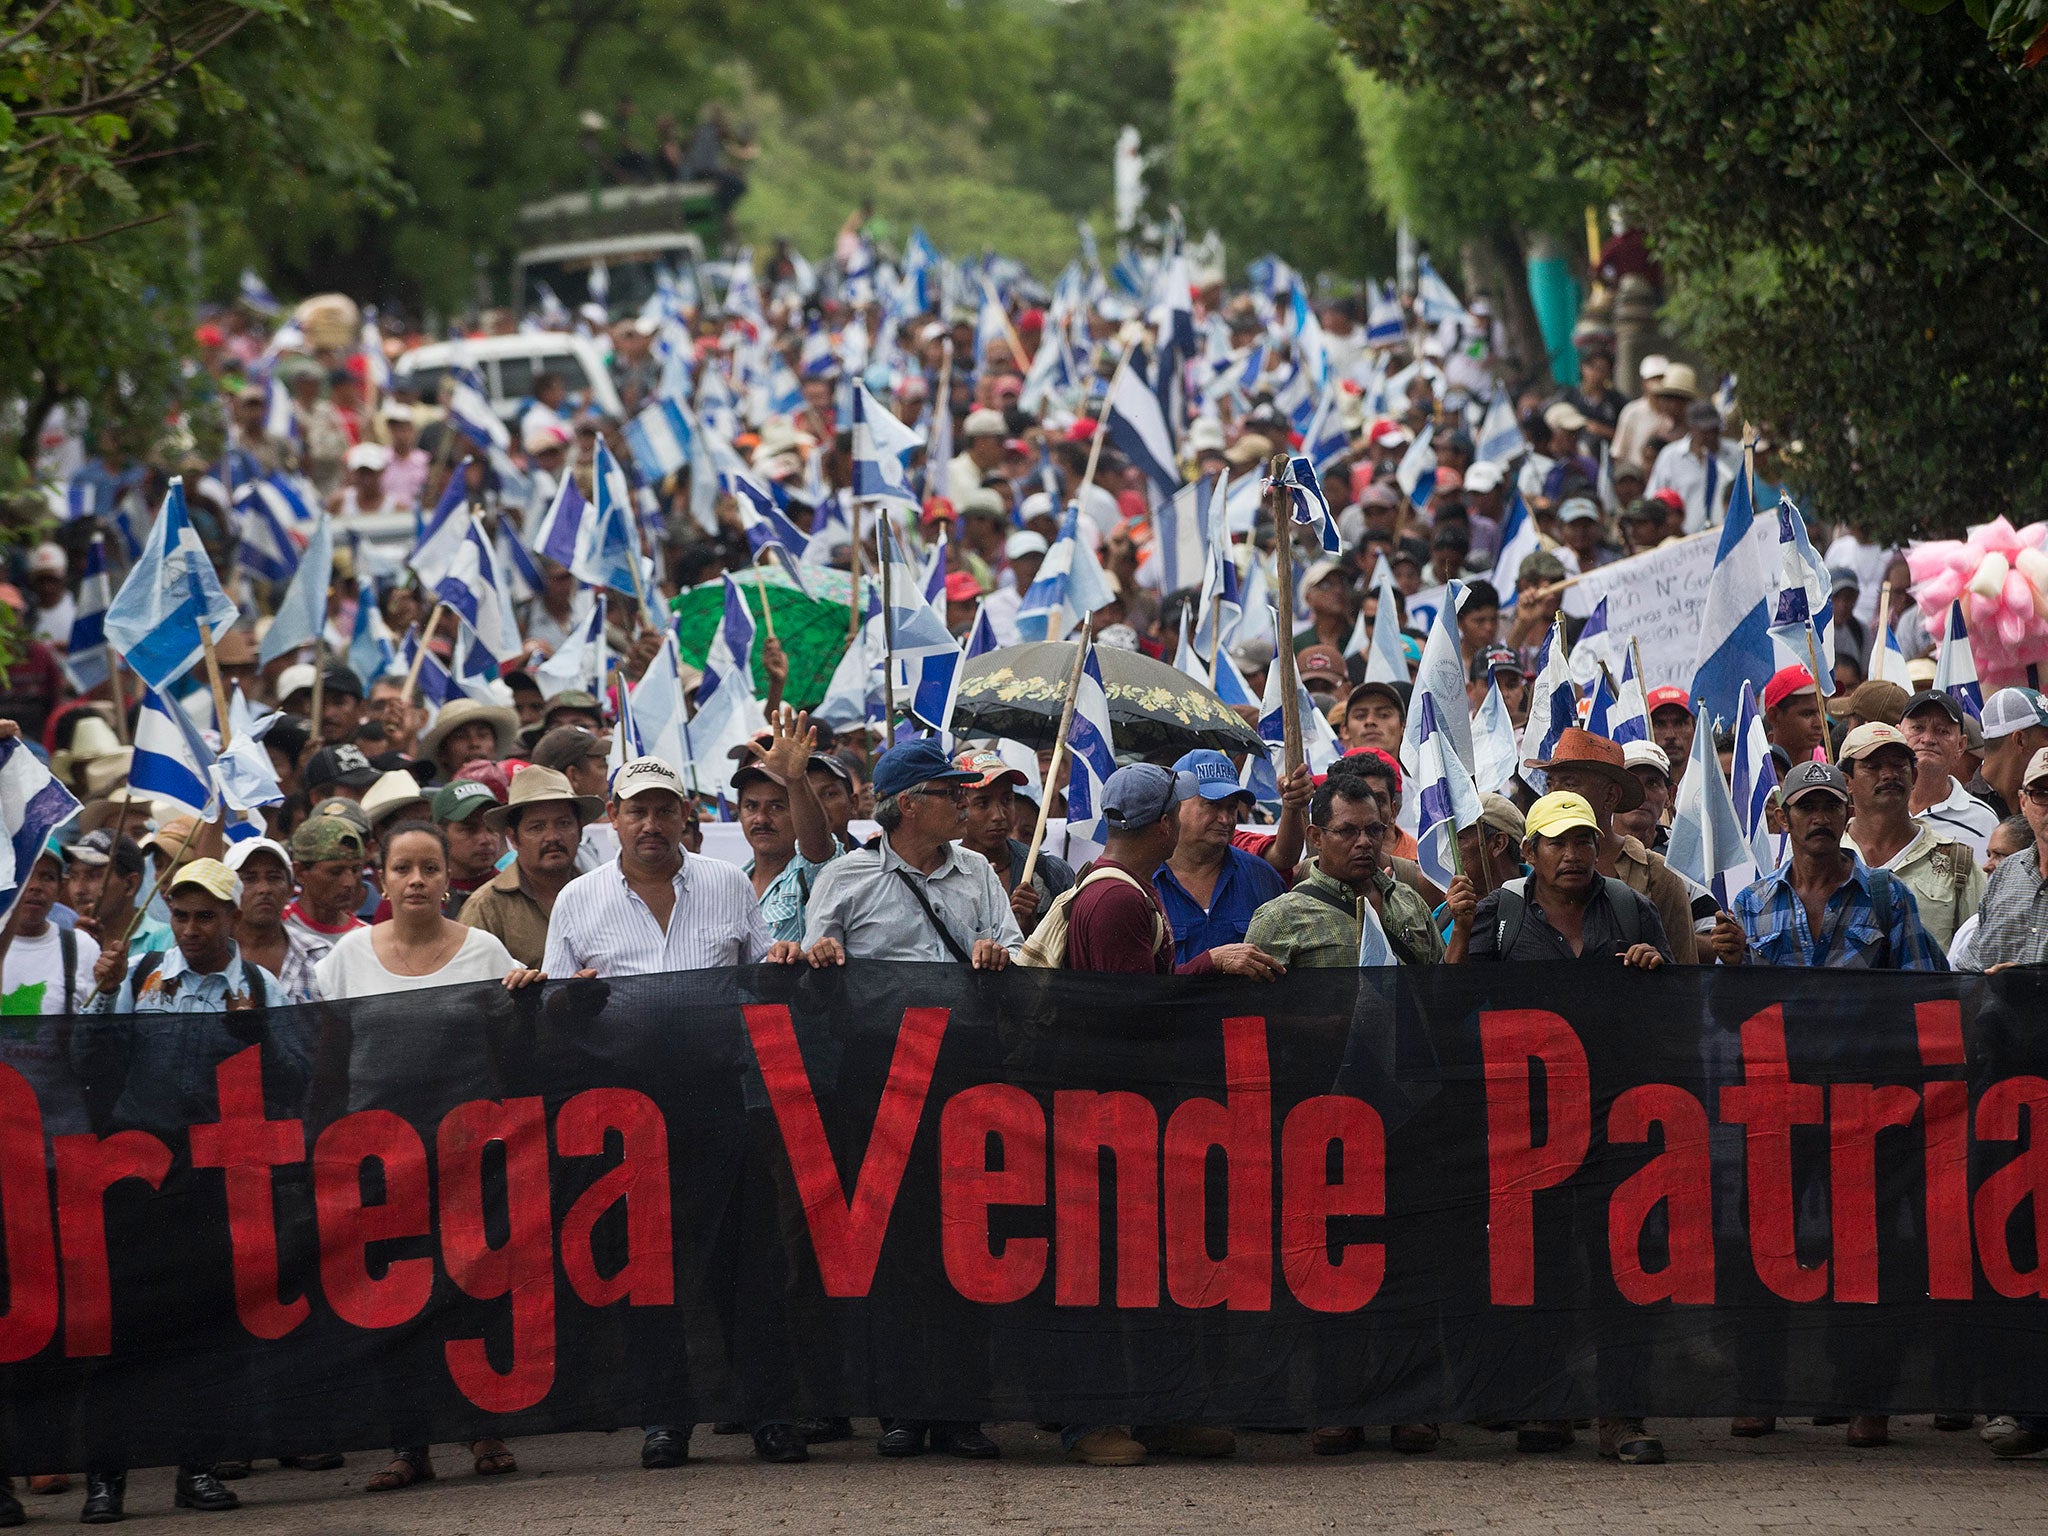 Opponents to the construction of Nicaragua's transoceanic canal take part in a national protest march against the canal project, in Juigalpa, Nicaragua. The banner reads: "Ortega traitor."